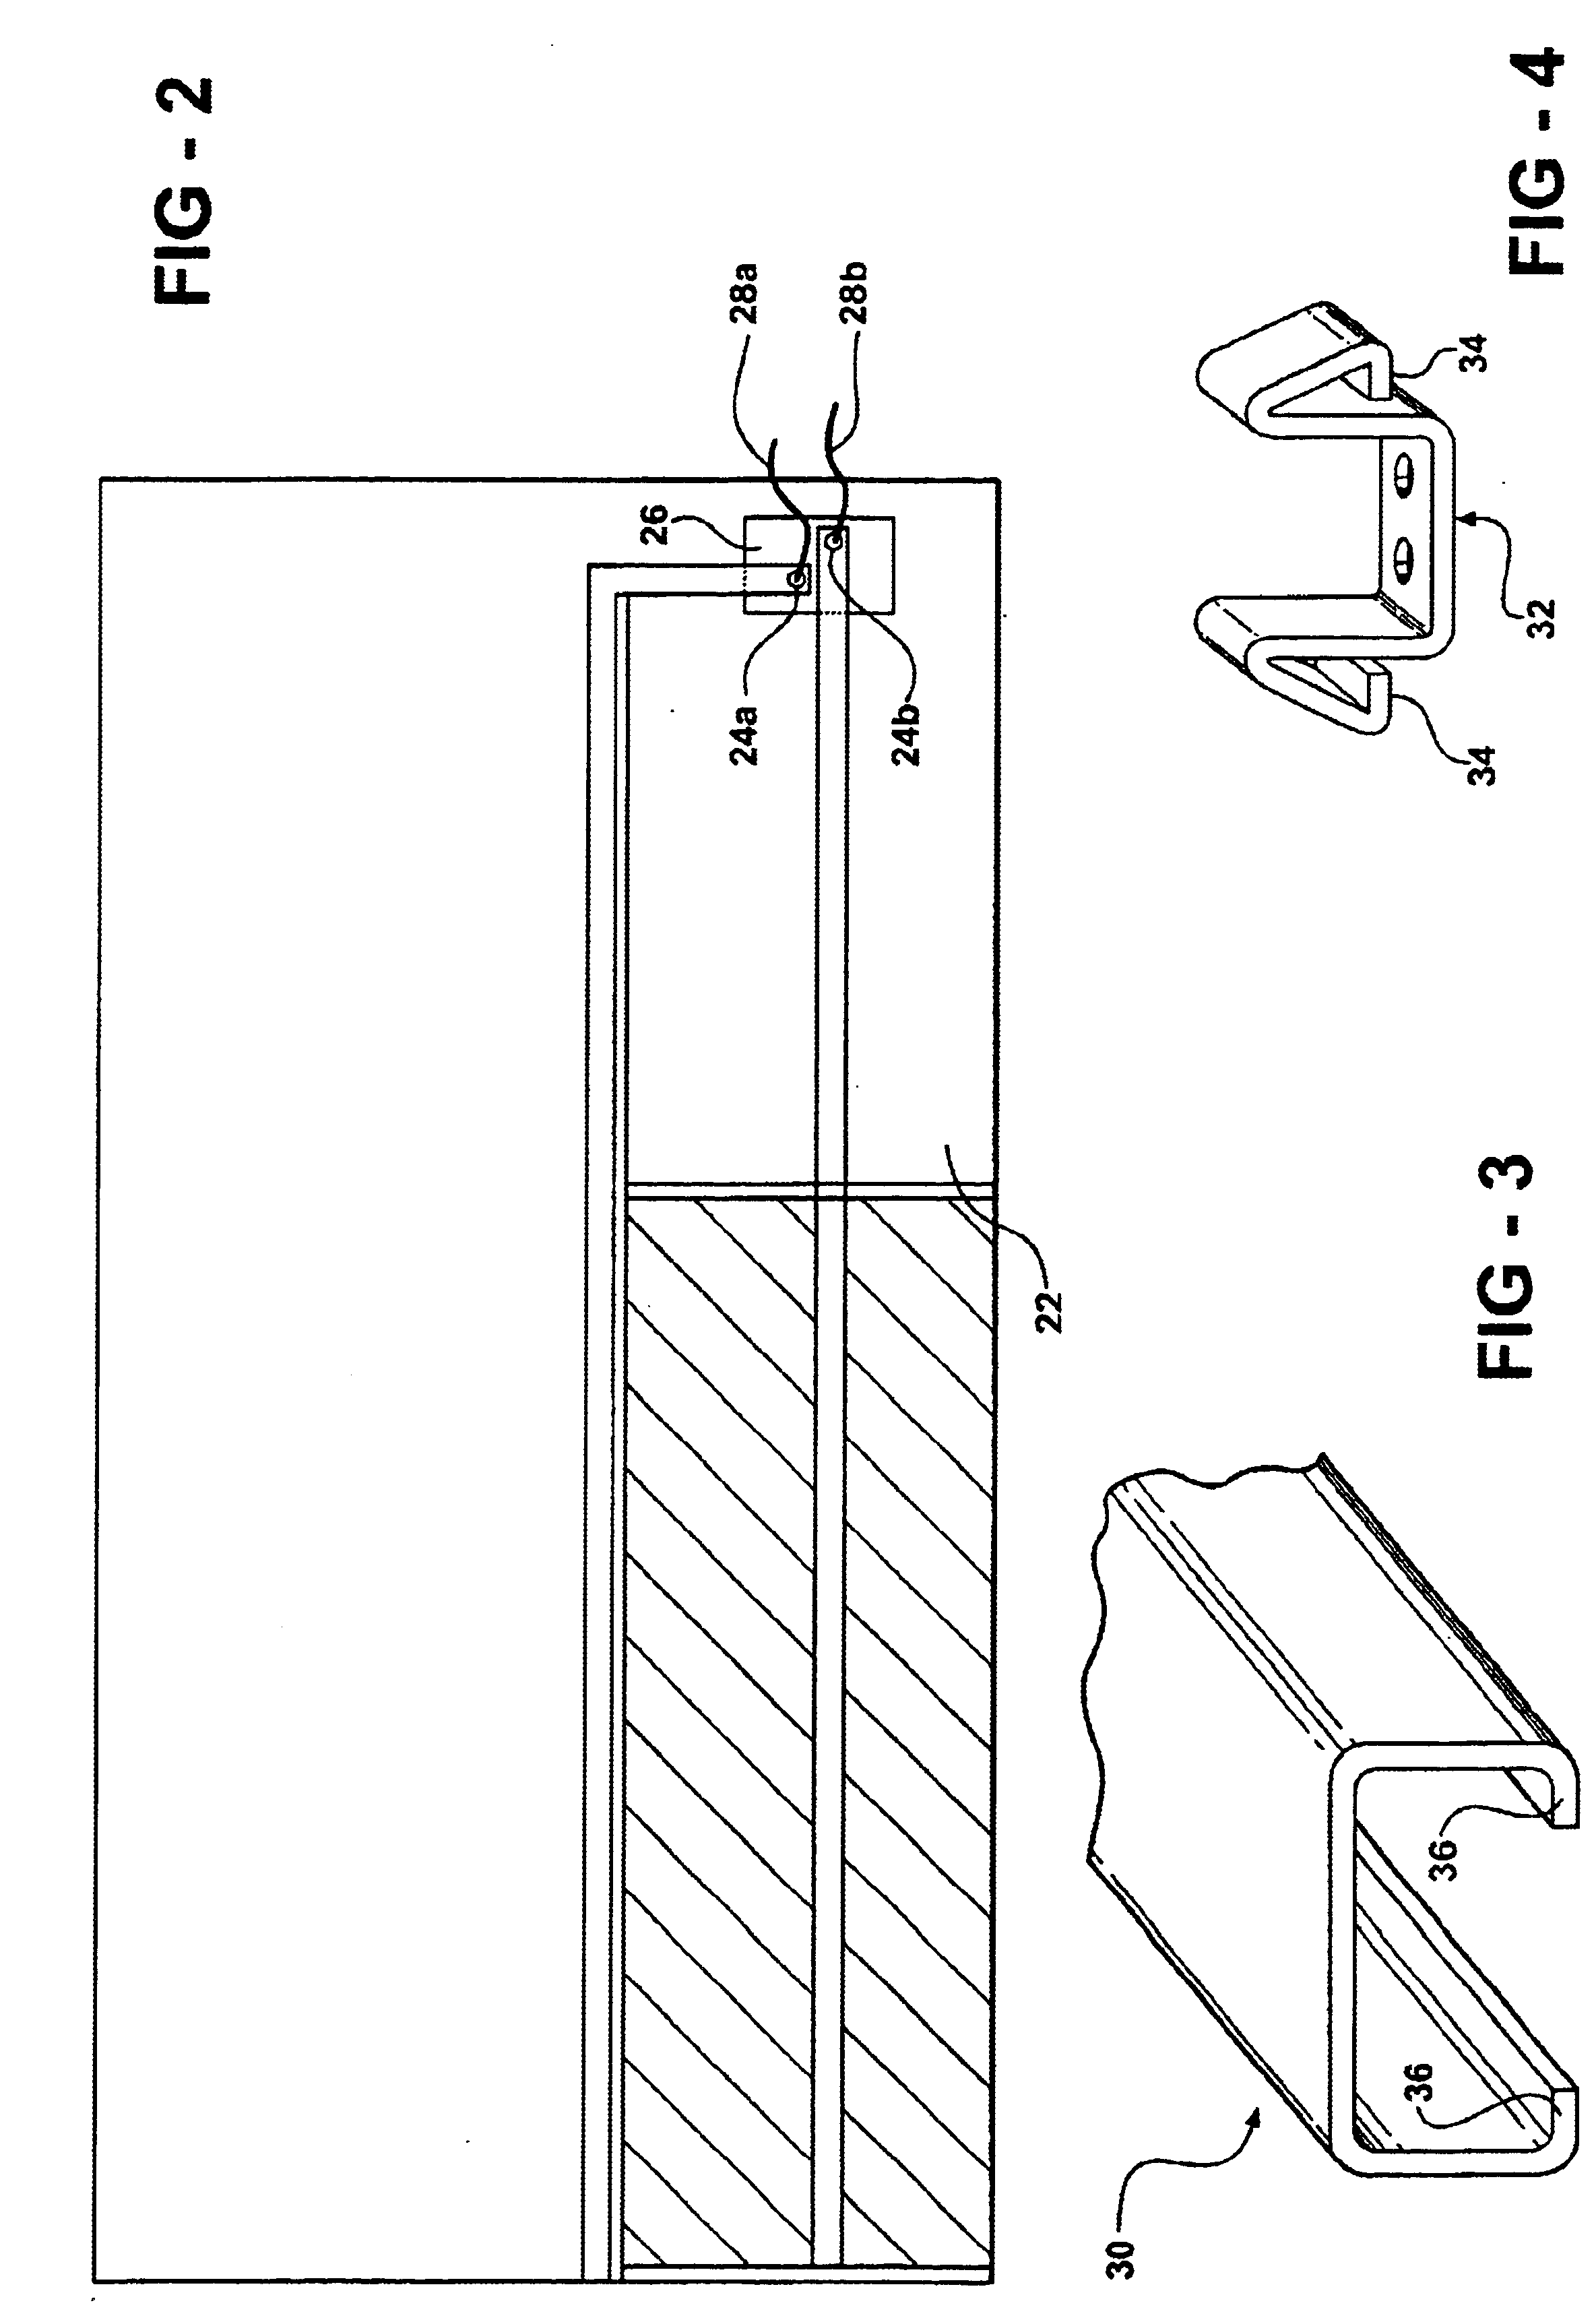 Photovoltaic roofing structure